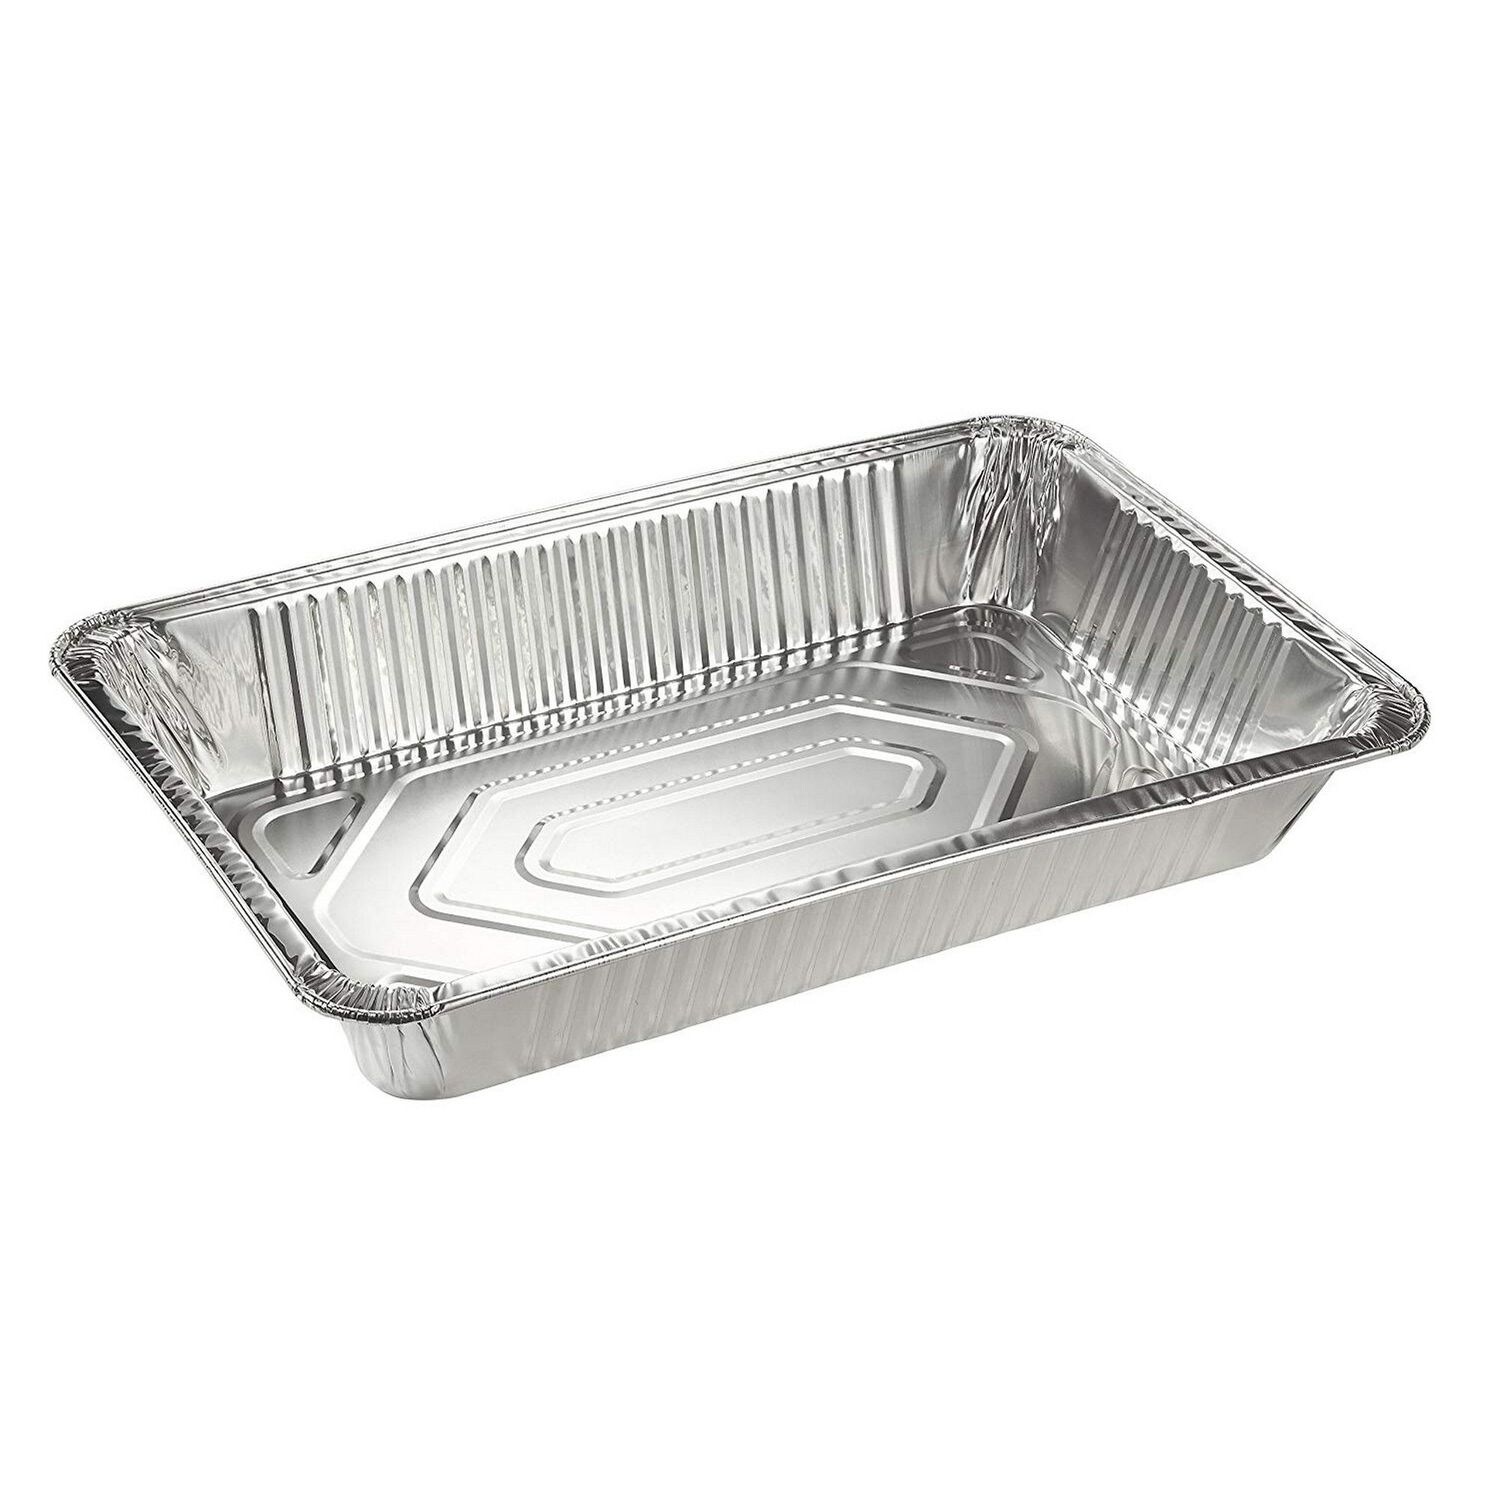 https://ak1.ostkcdn.com/images/products/29868097/30-PCS-Aluminum-Foil-Pans-Disposable-Full-Size-Deep-Chafing-Pans-for-Baking-66f69fc0-3a8c-406b-8850-802aa5faa554.jpg